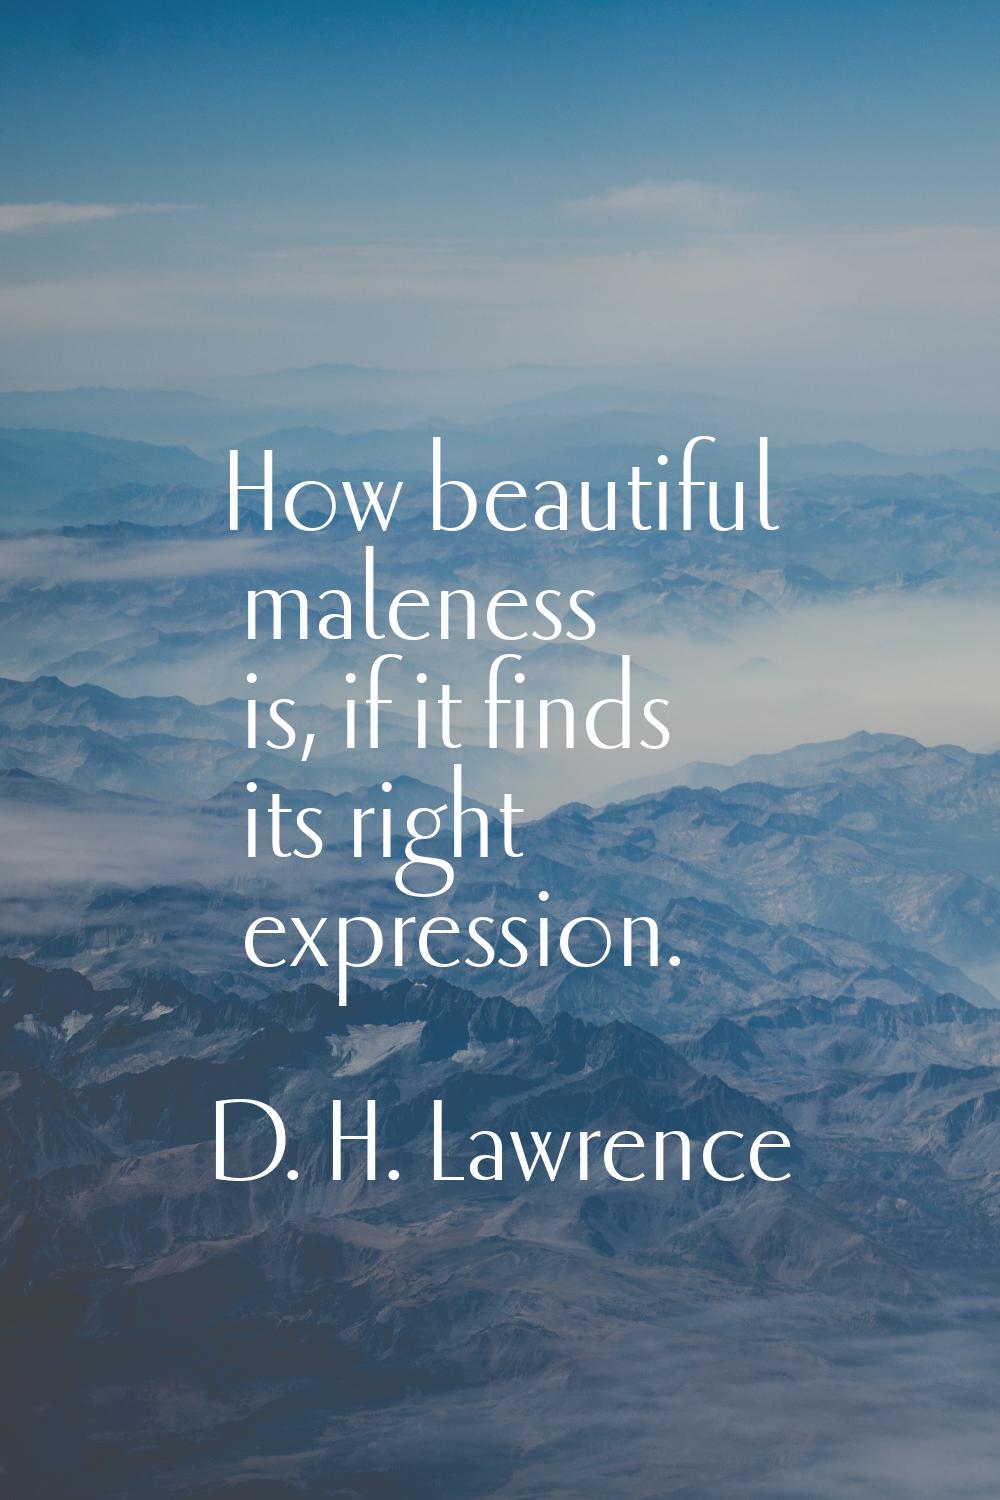 How beautiful maleness is, if it finds its right expression.